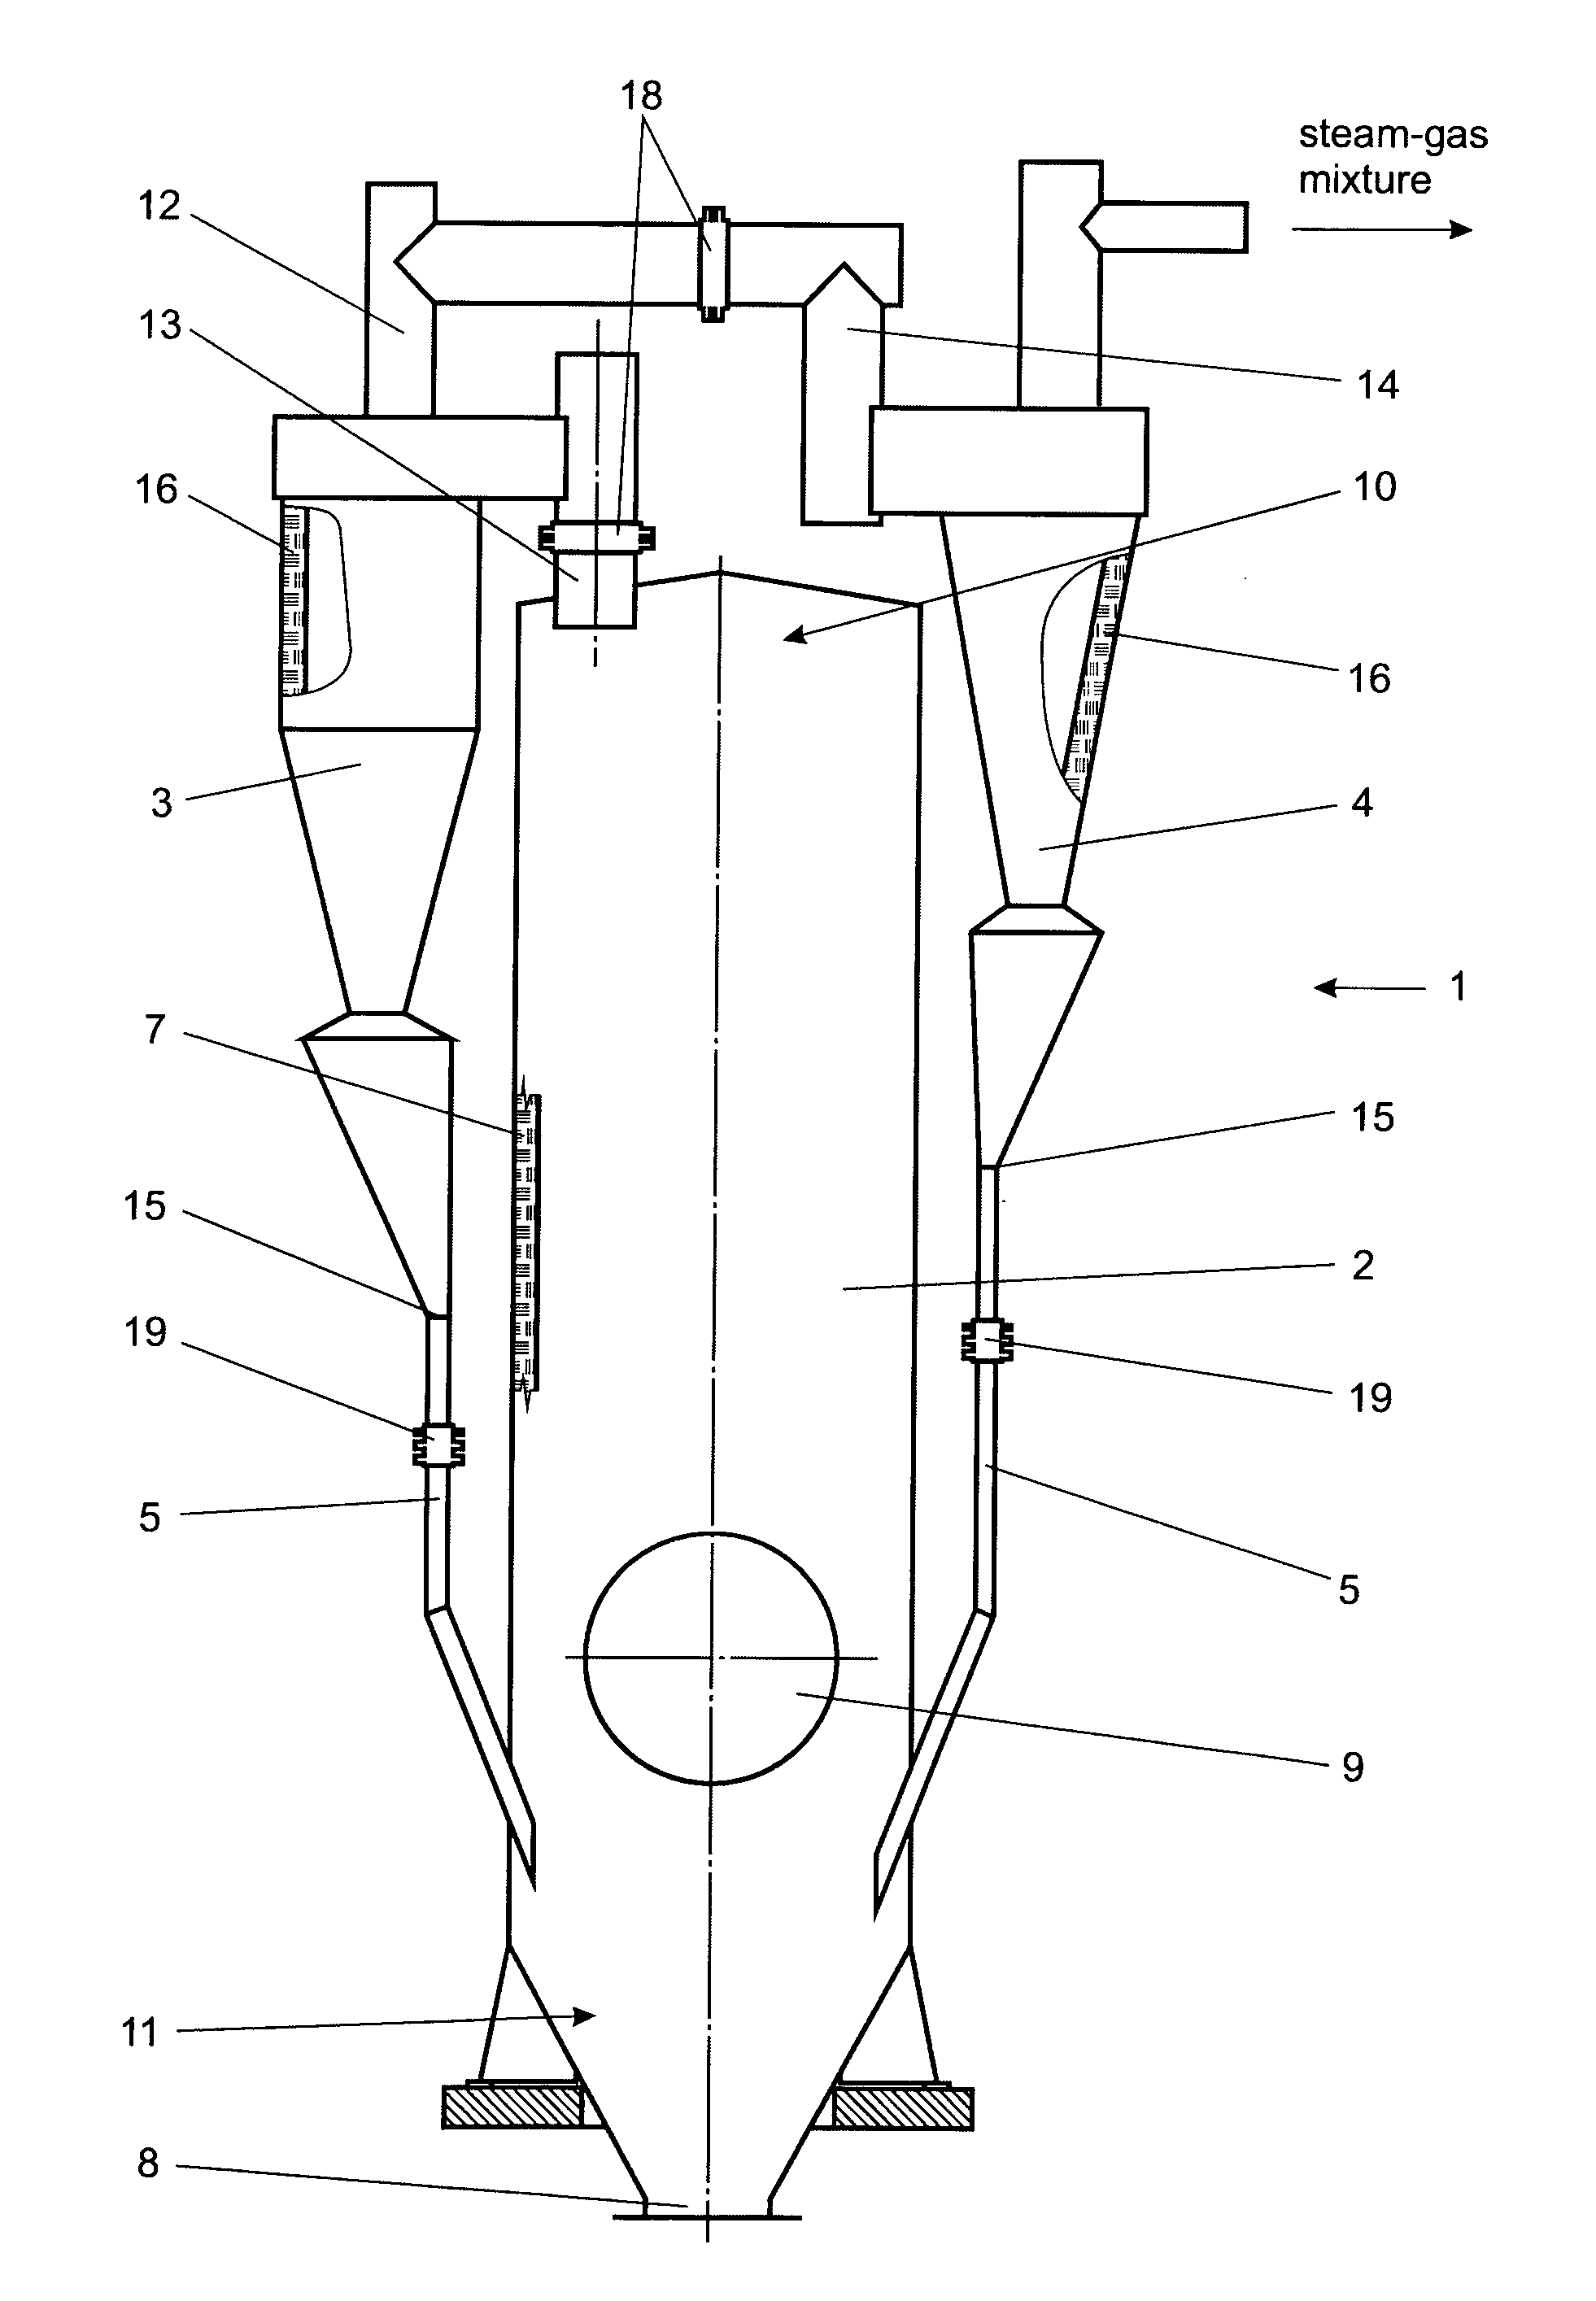 Separator of solid particles from steam-gas mixture